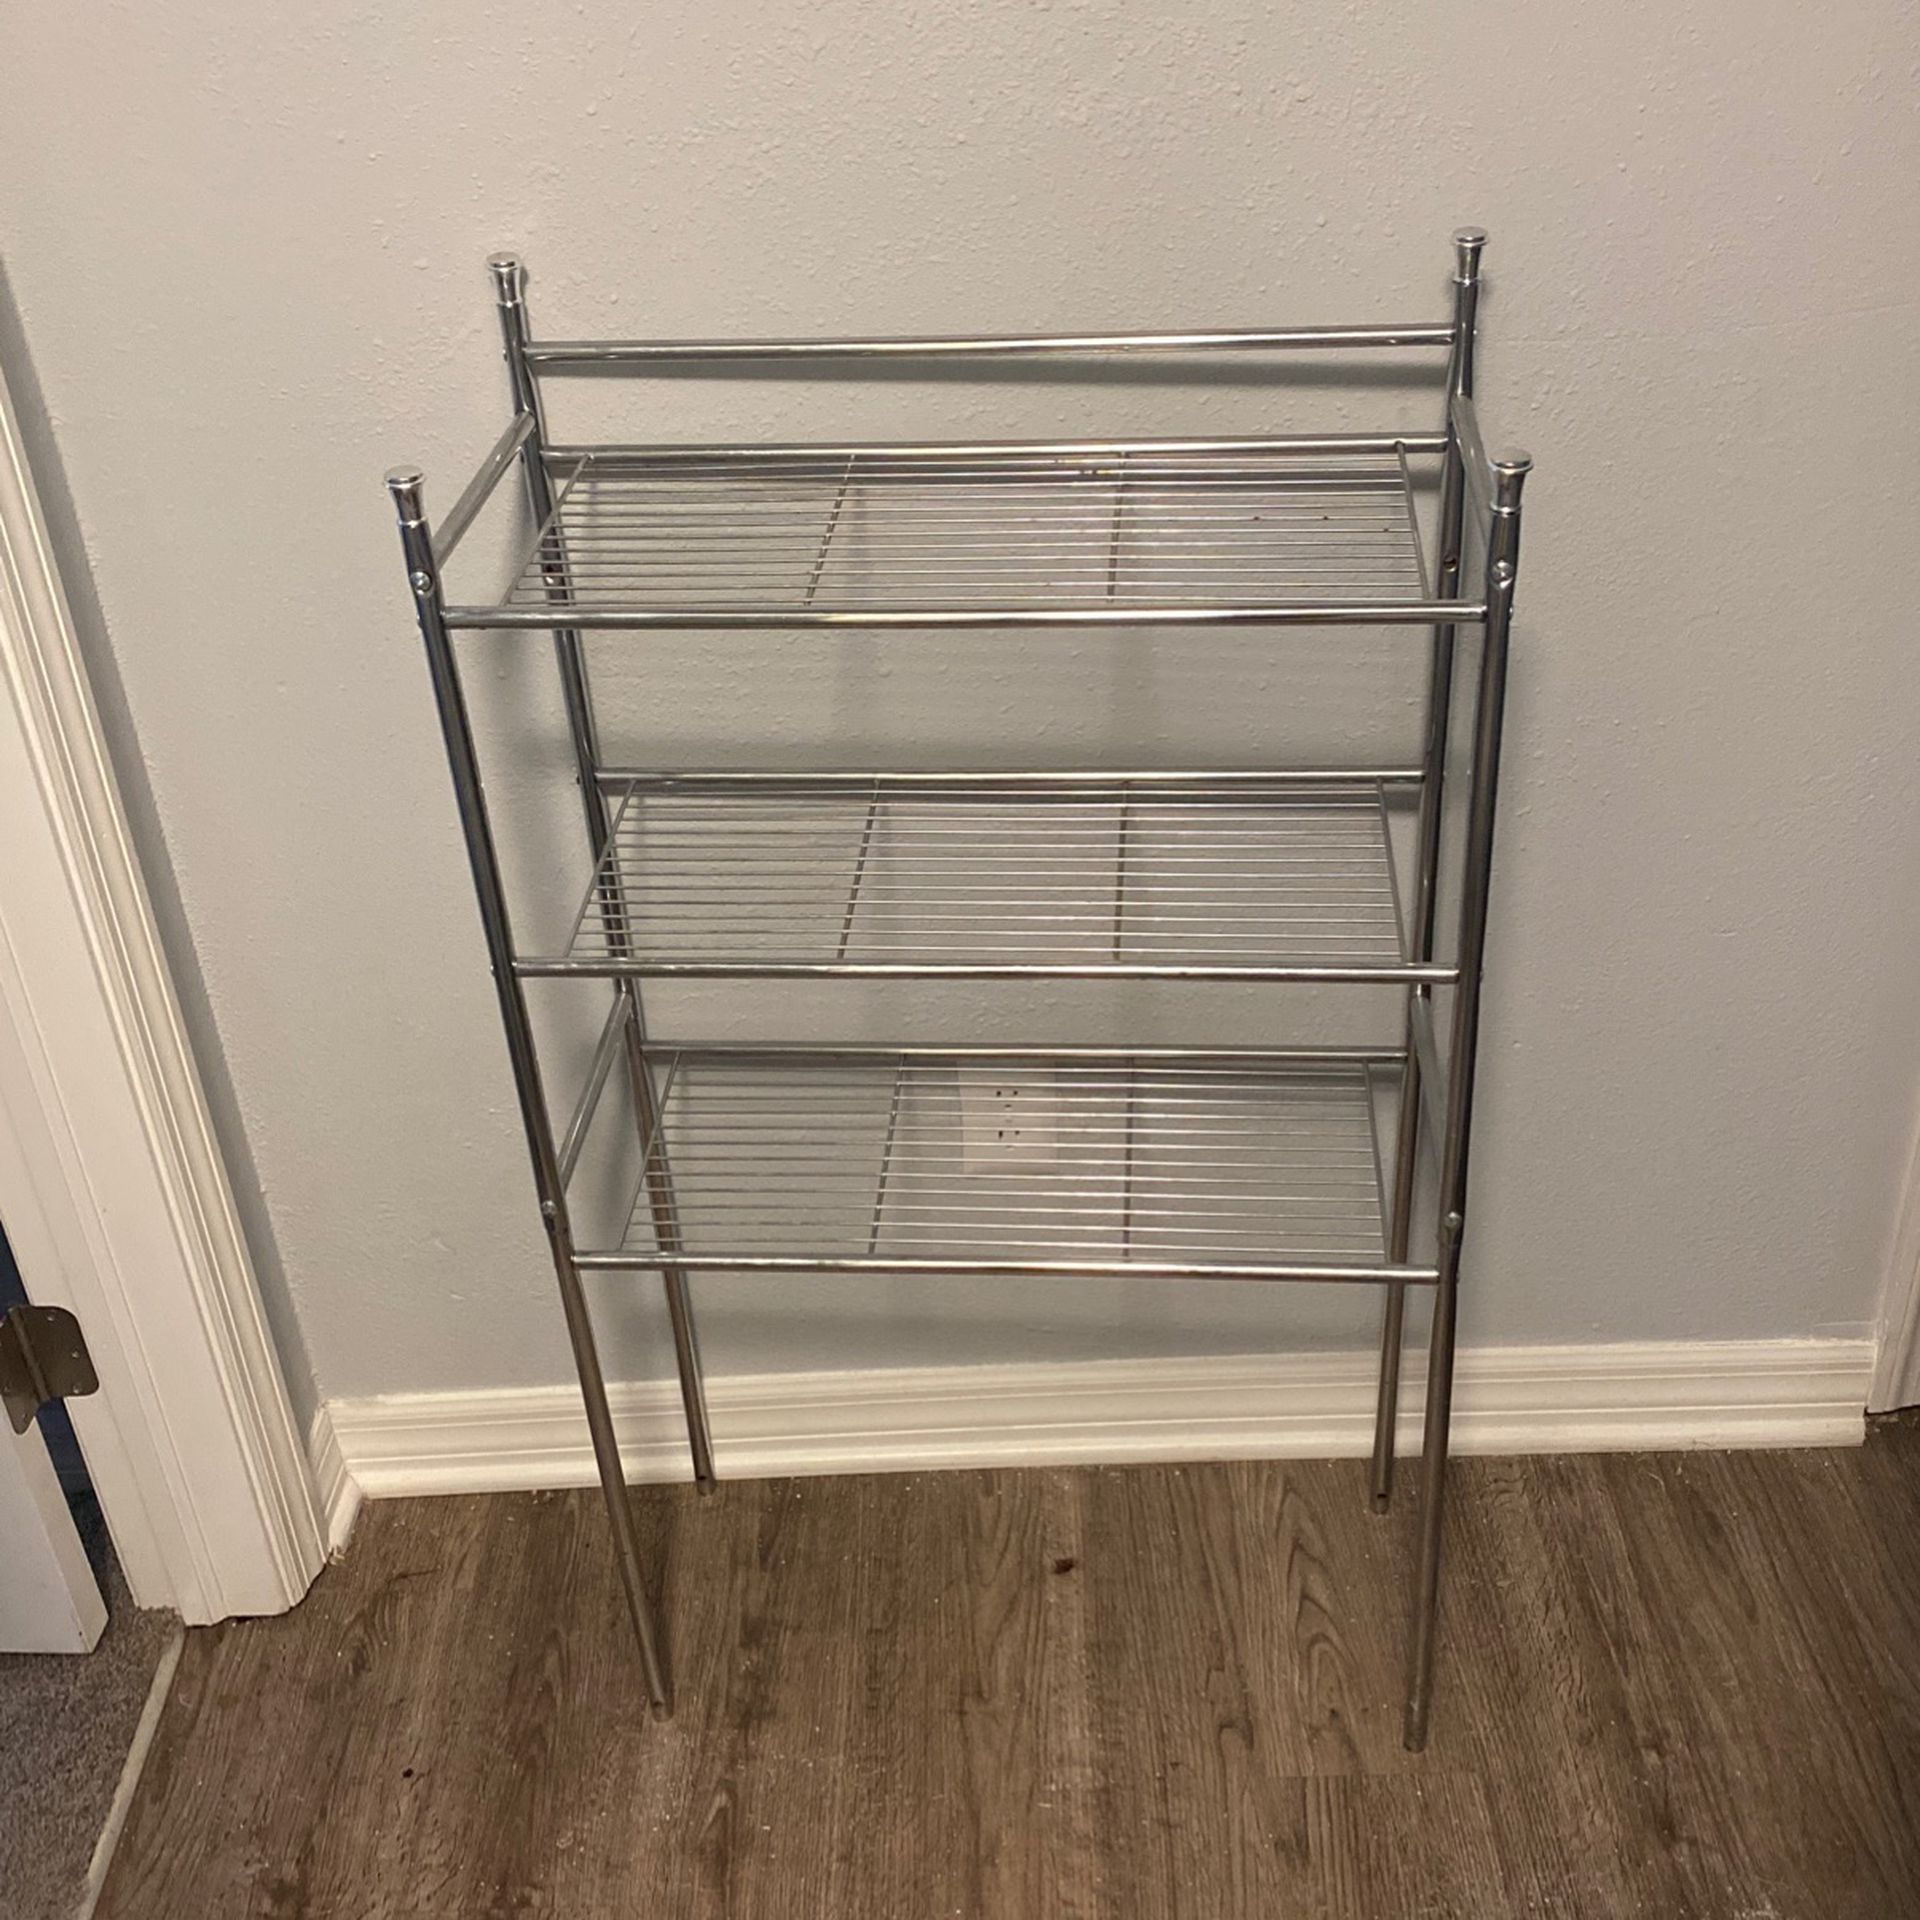 Free Metal Stand To Organize